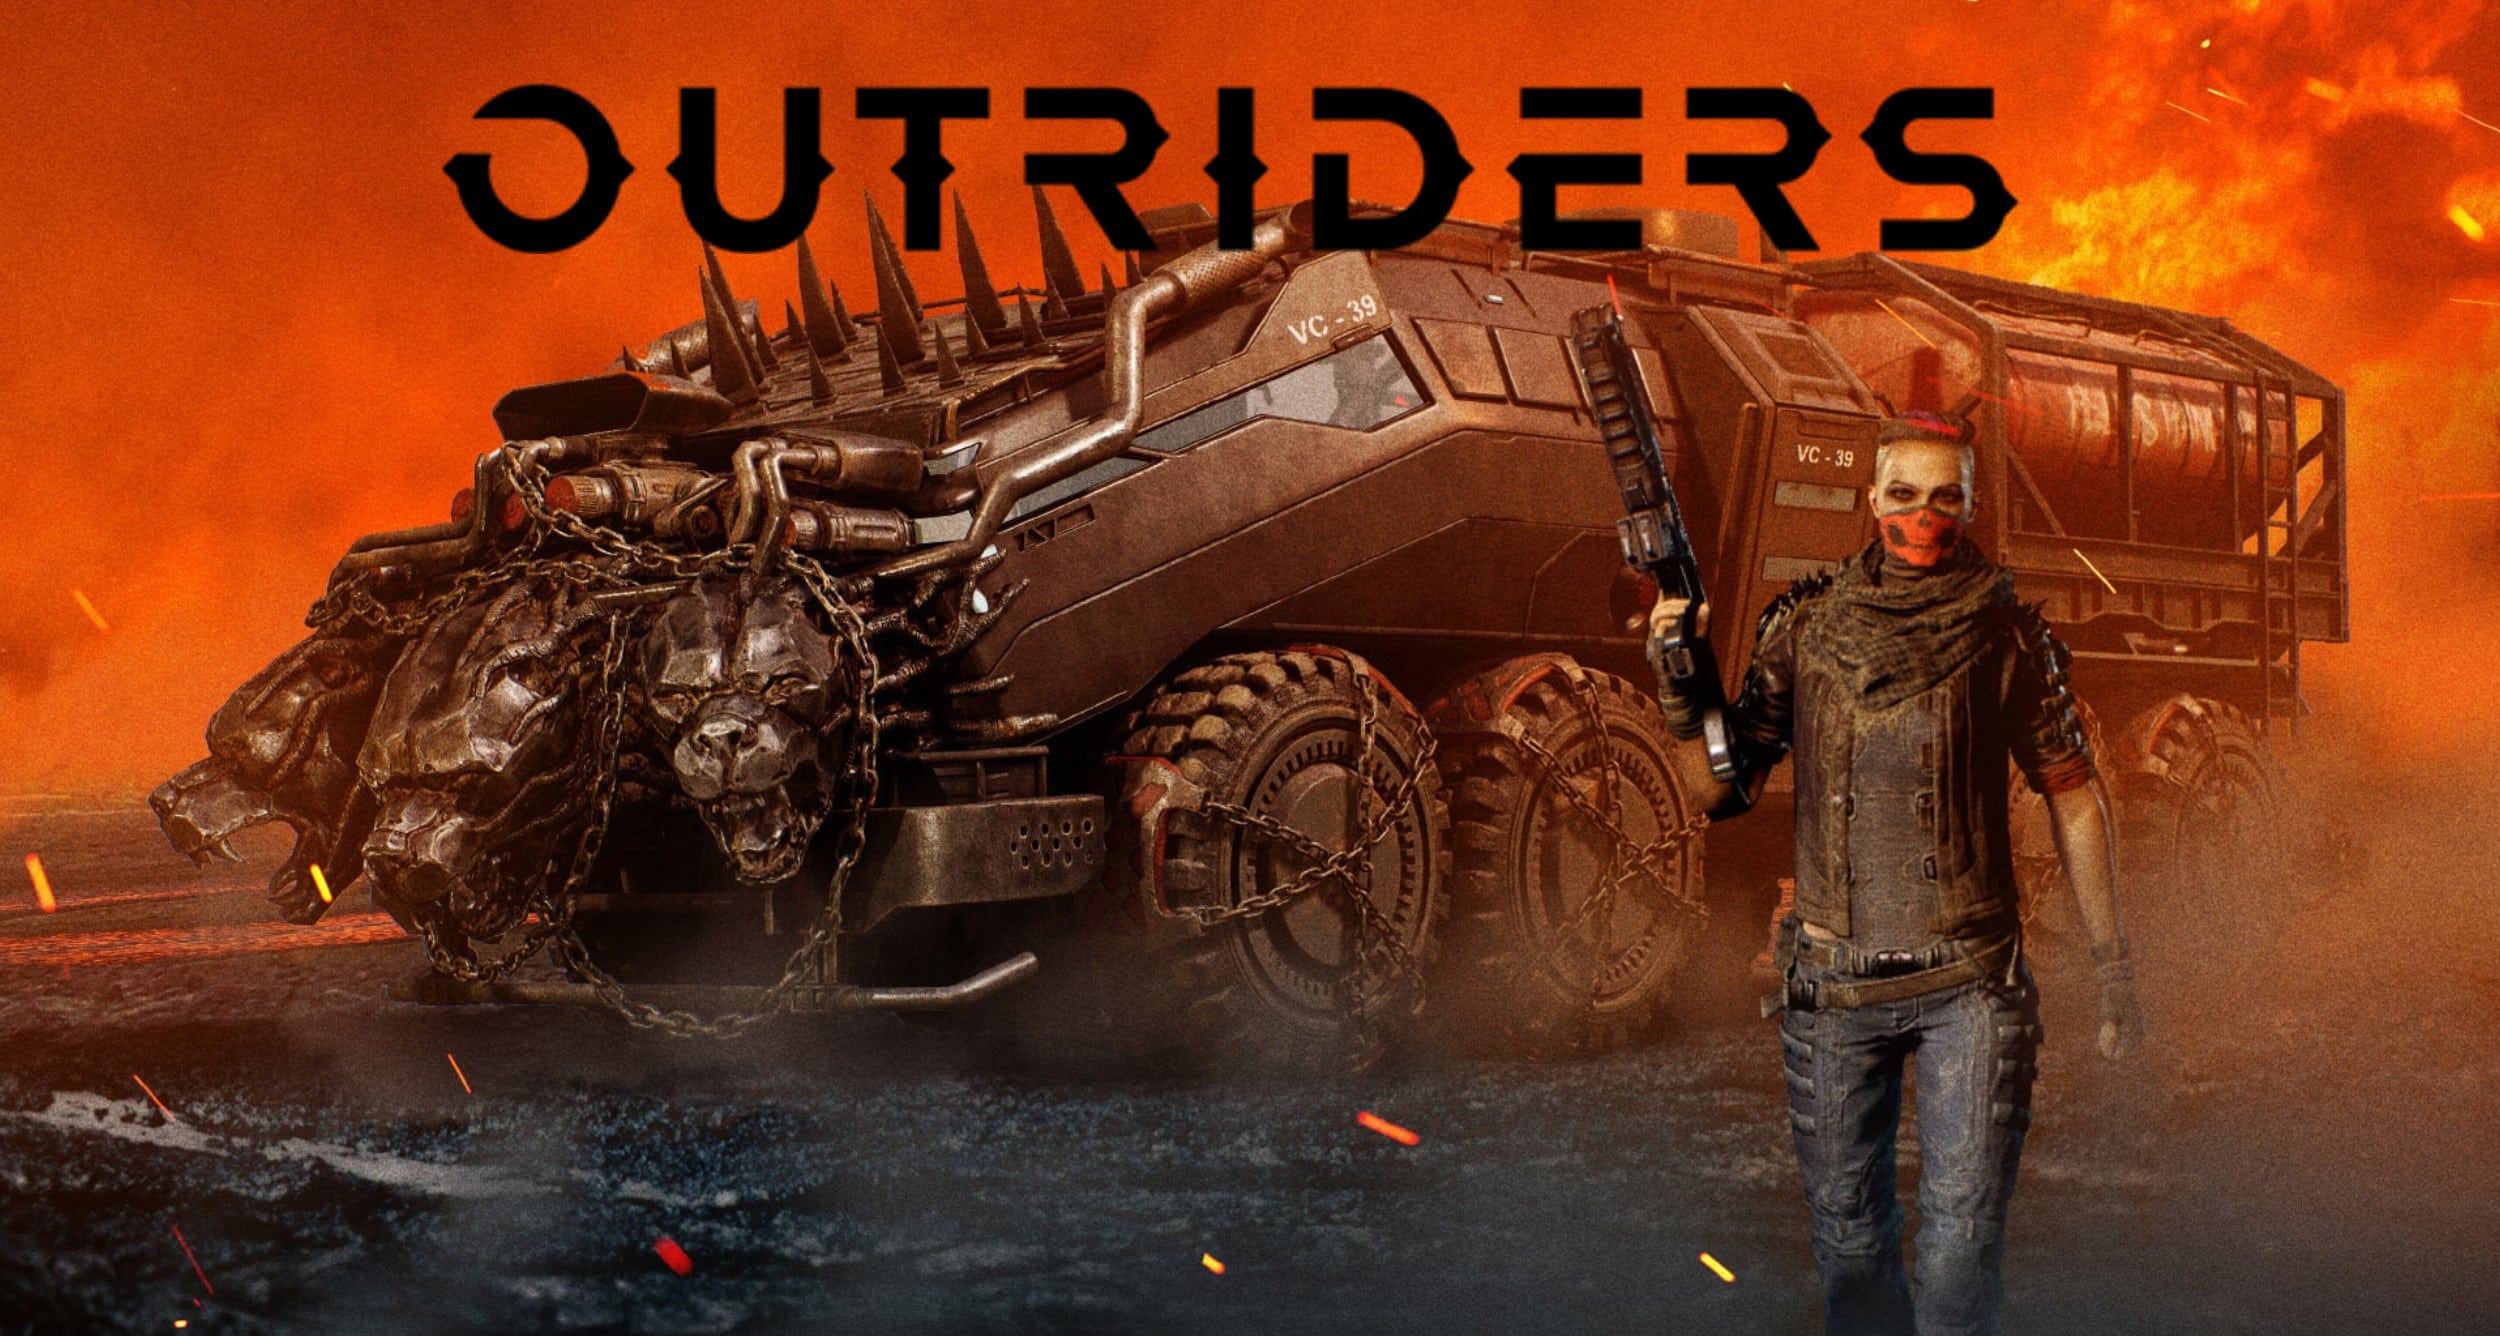 Outriders Cheats